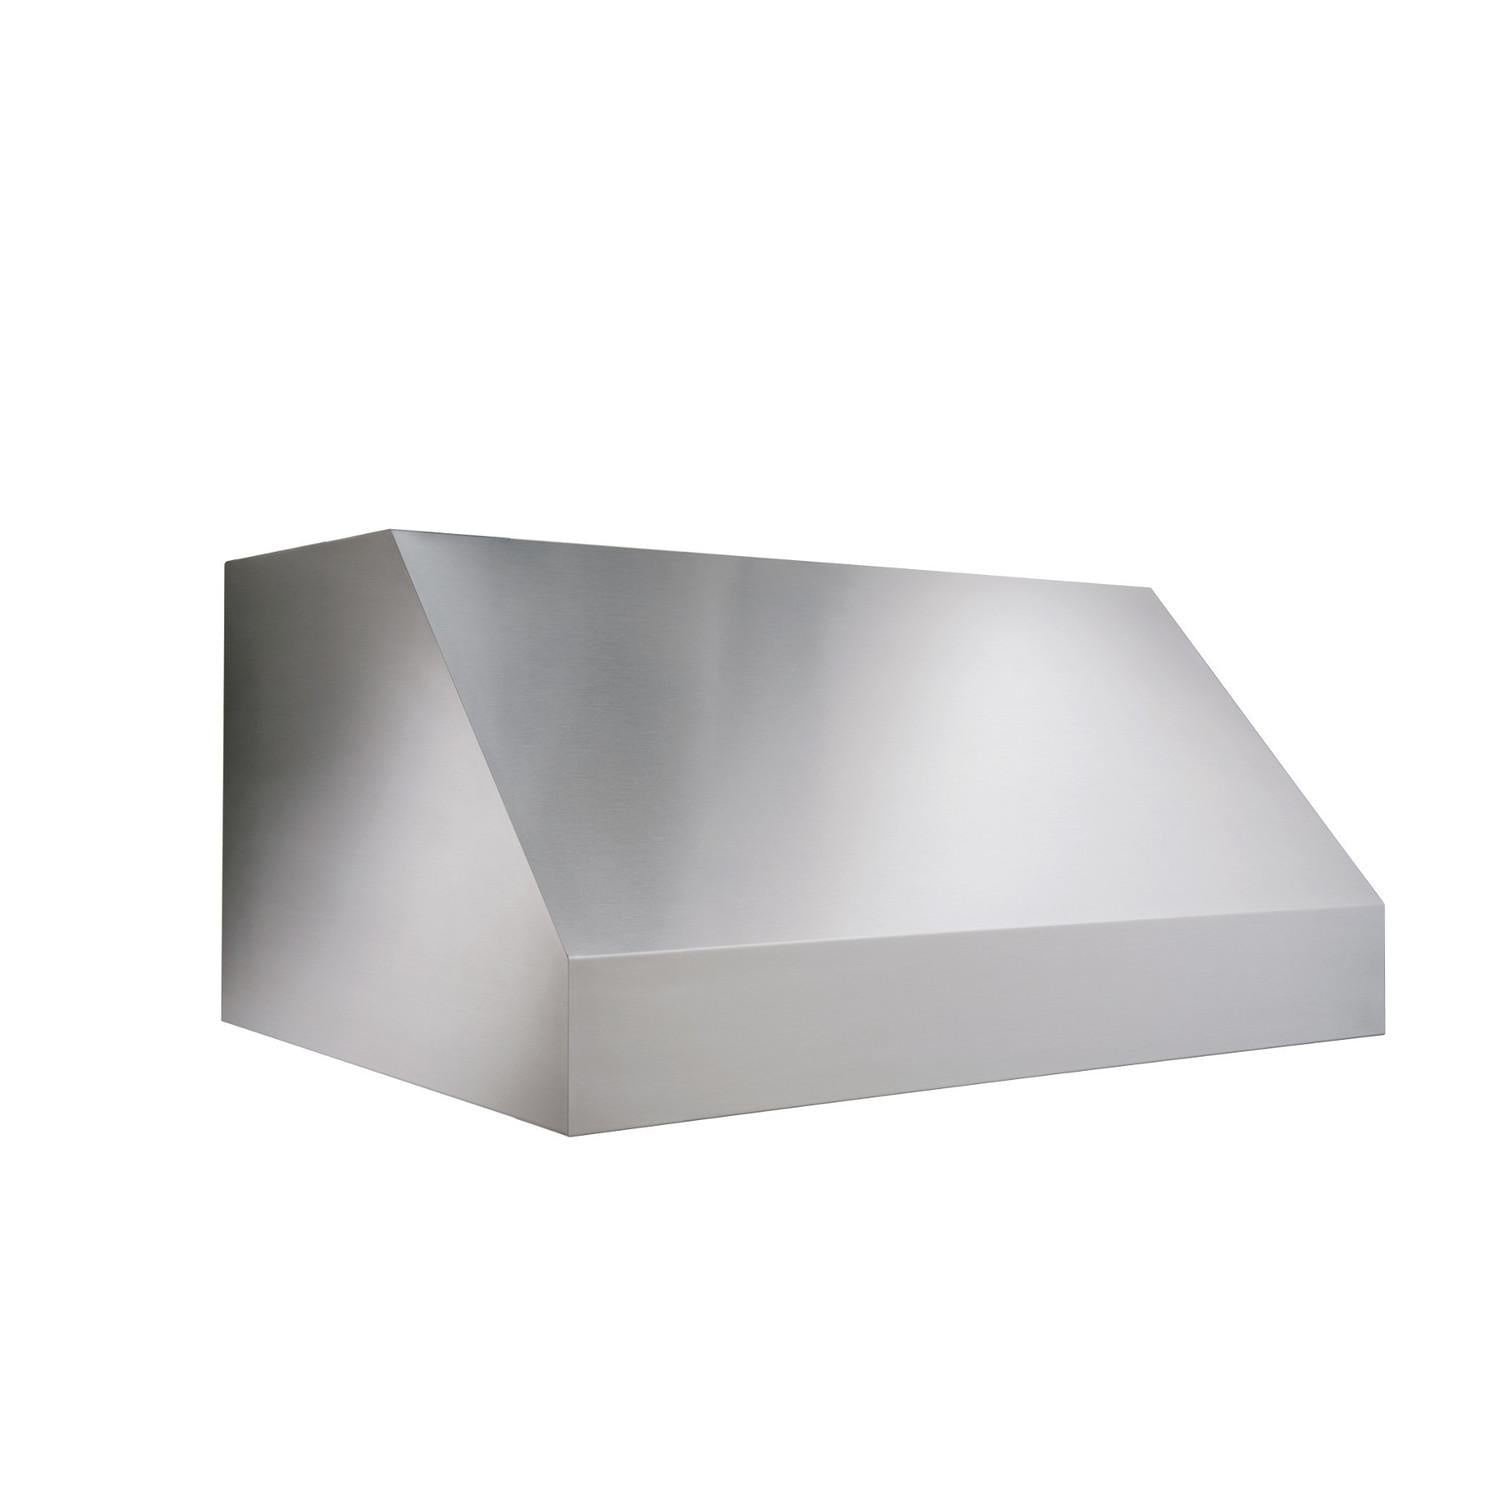 Broan® EPD61 Series 48-inch Pro-Style Outdoor Range Hood, 1290 Max Blower CFM, Stainless Steel